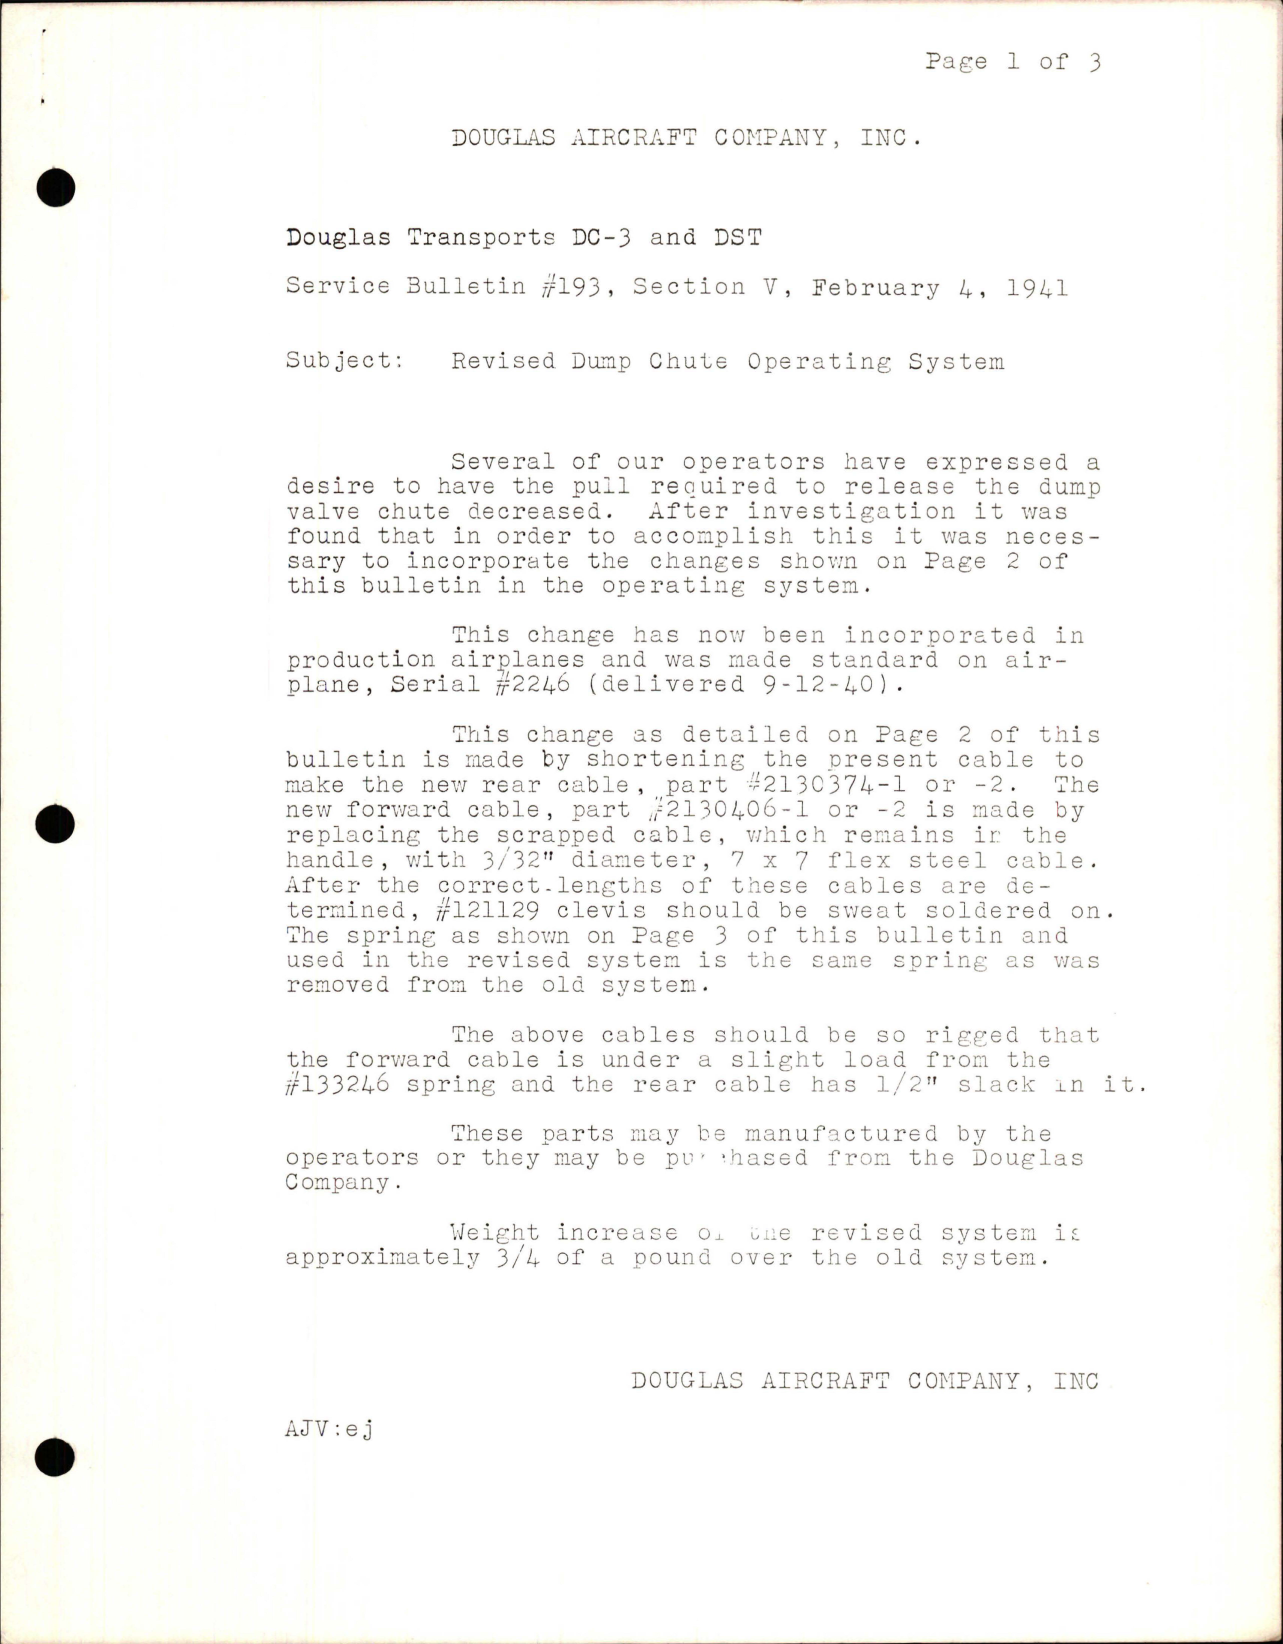 Sample page 1 from AirCorps Library document: Revised Dump Chute Operating System